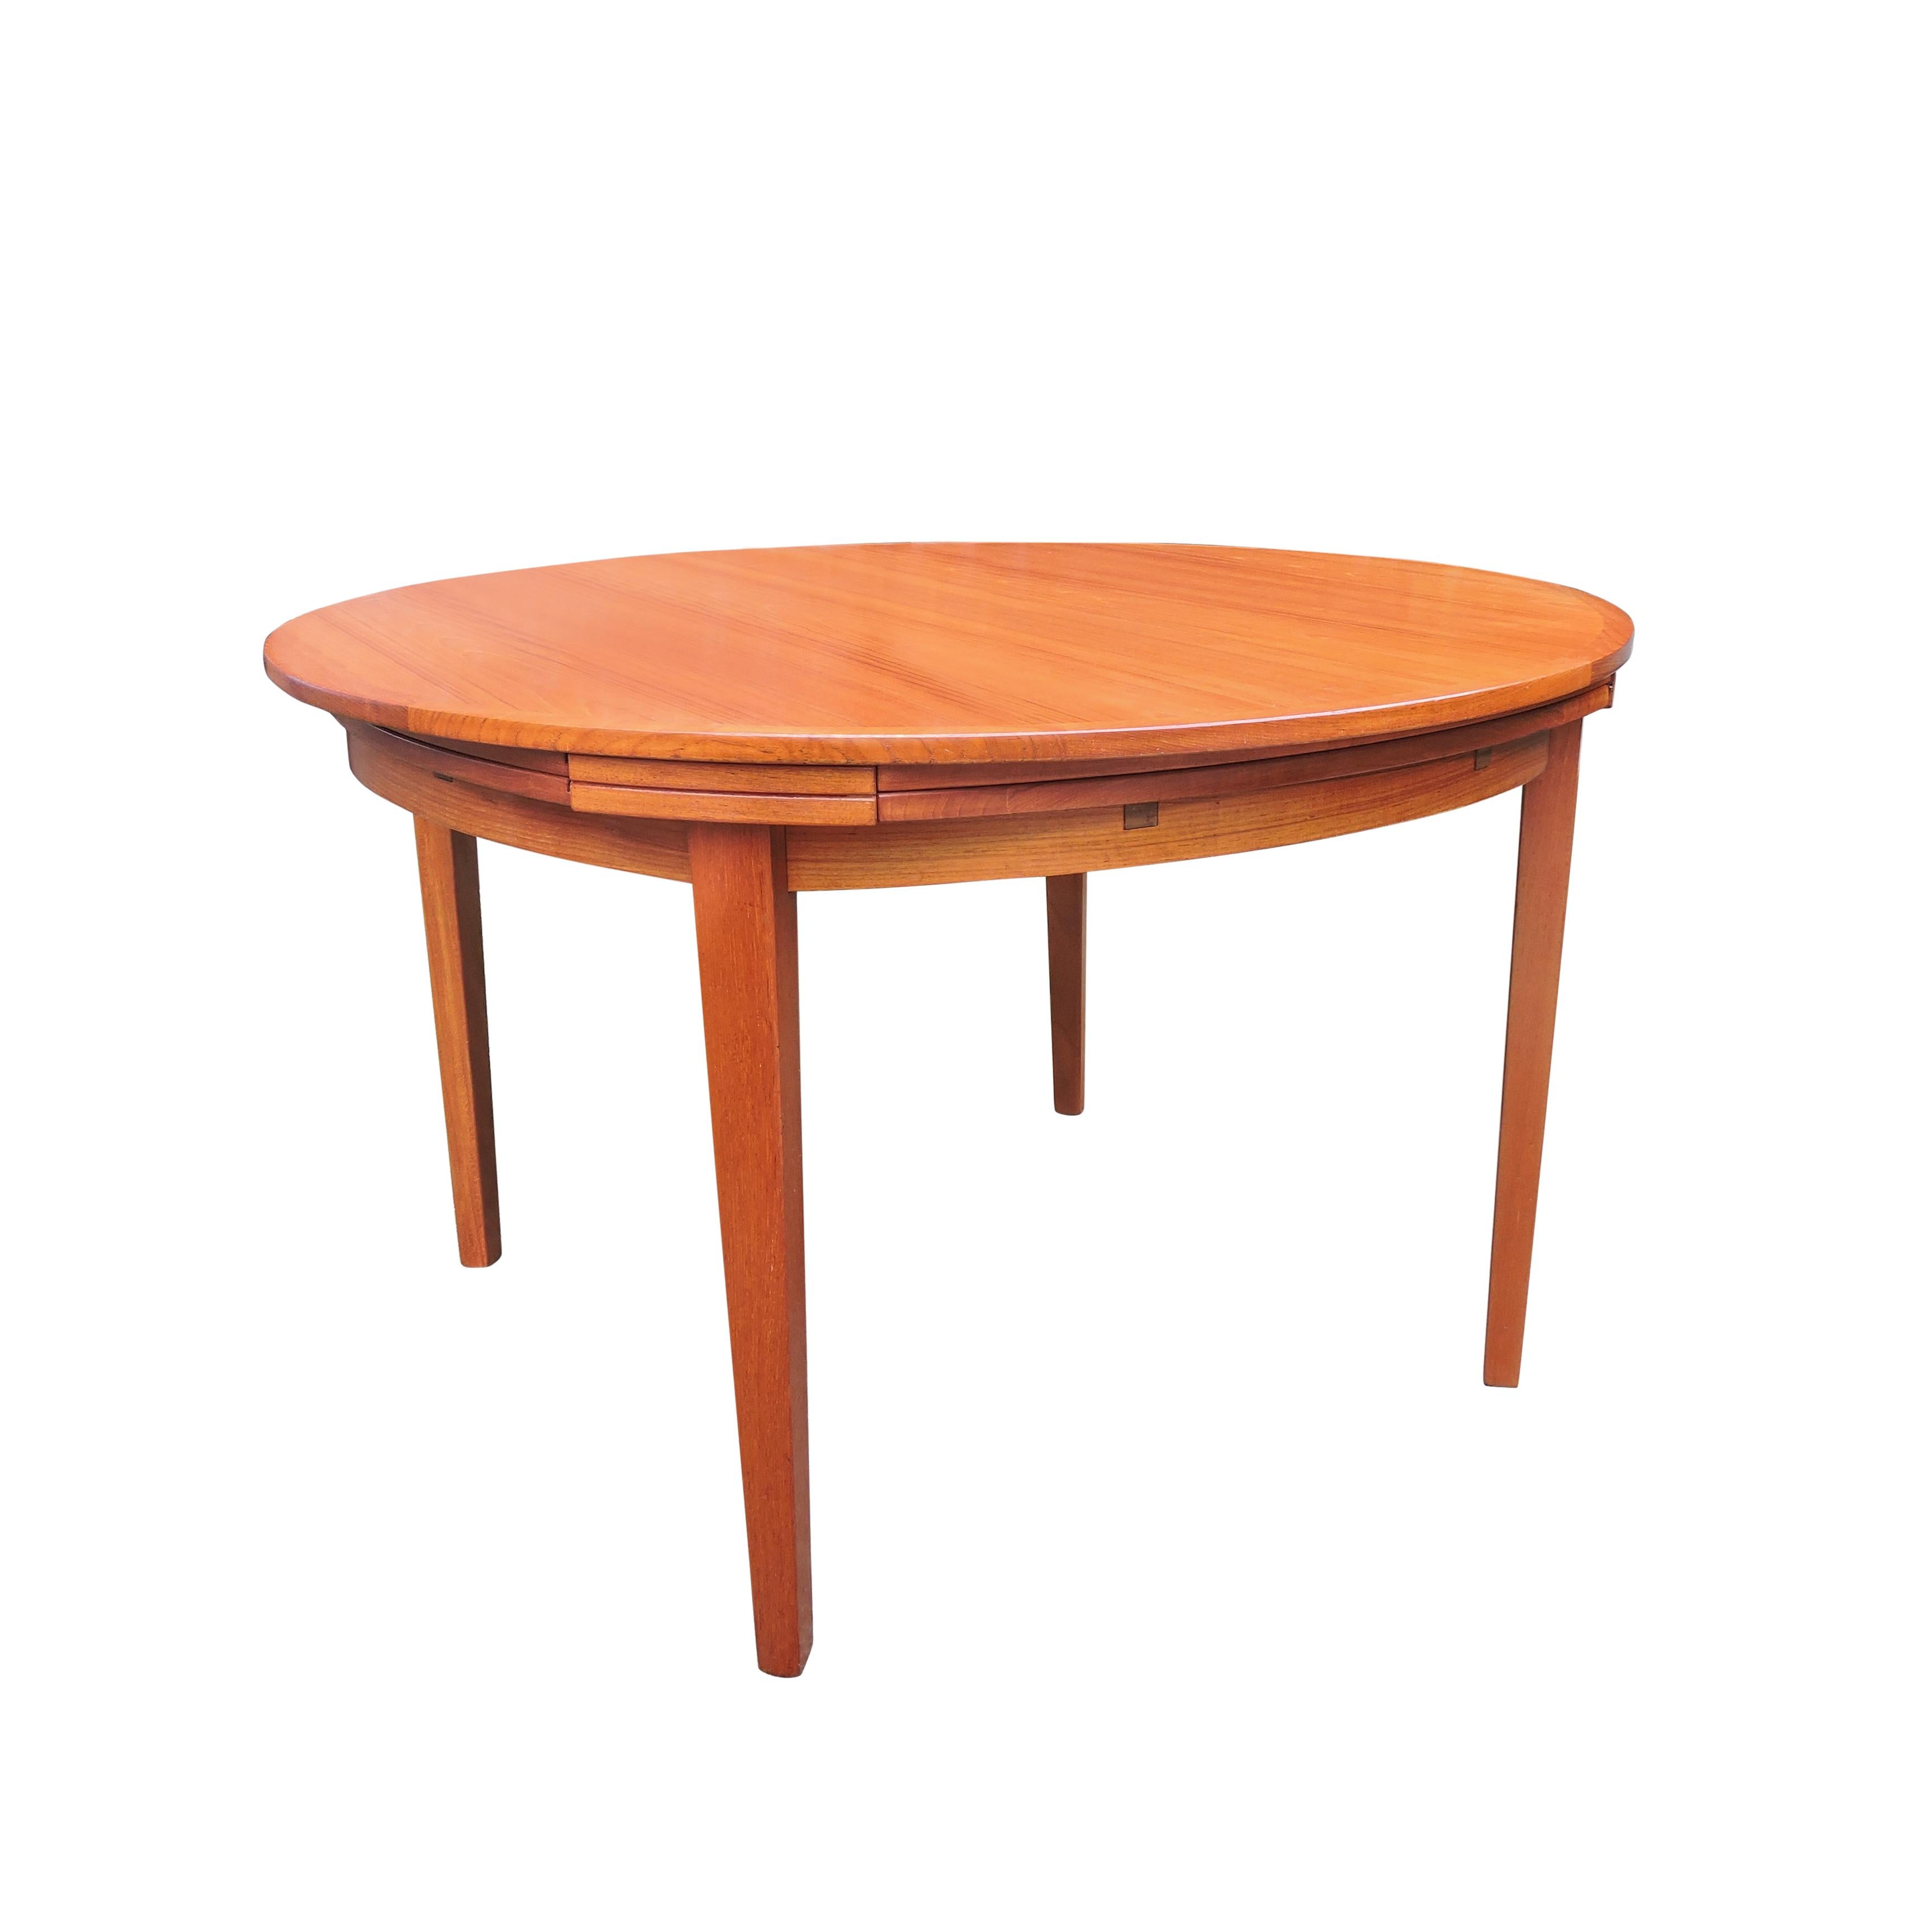 This midcentury flip-flap dining table seats 4 when closed and 6-8 when open (174cm extended).